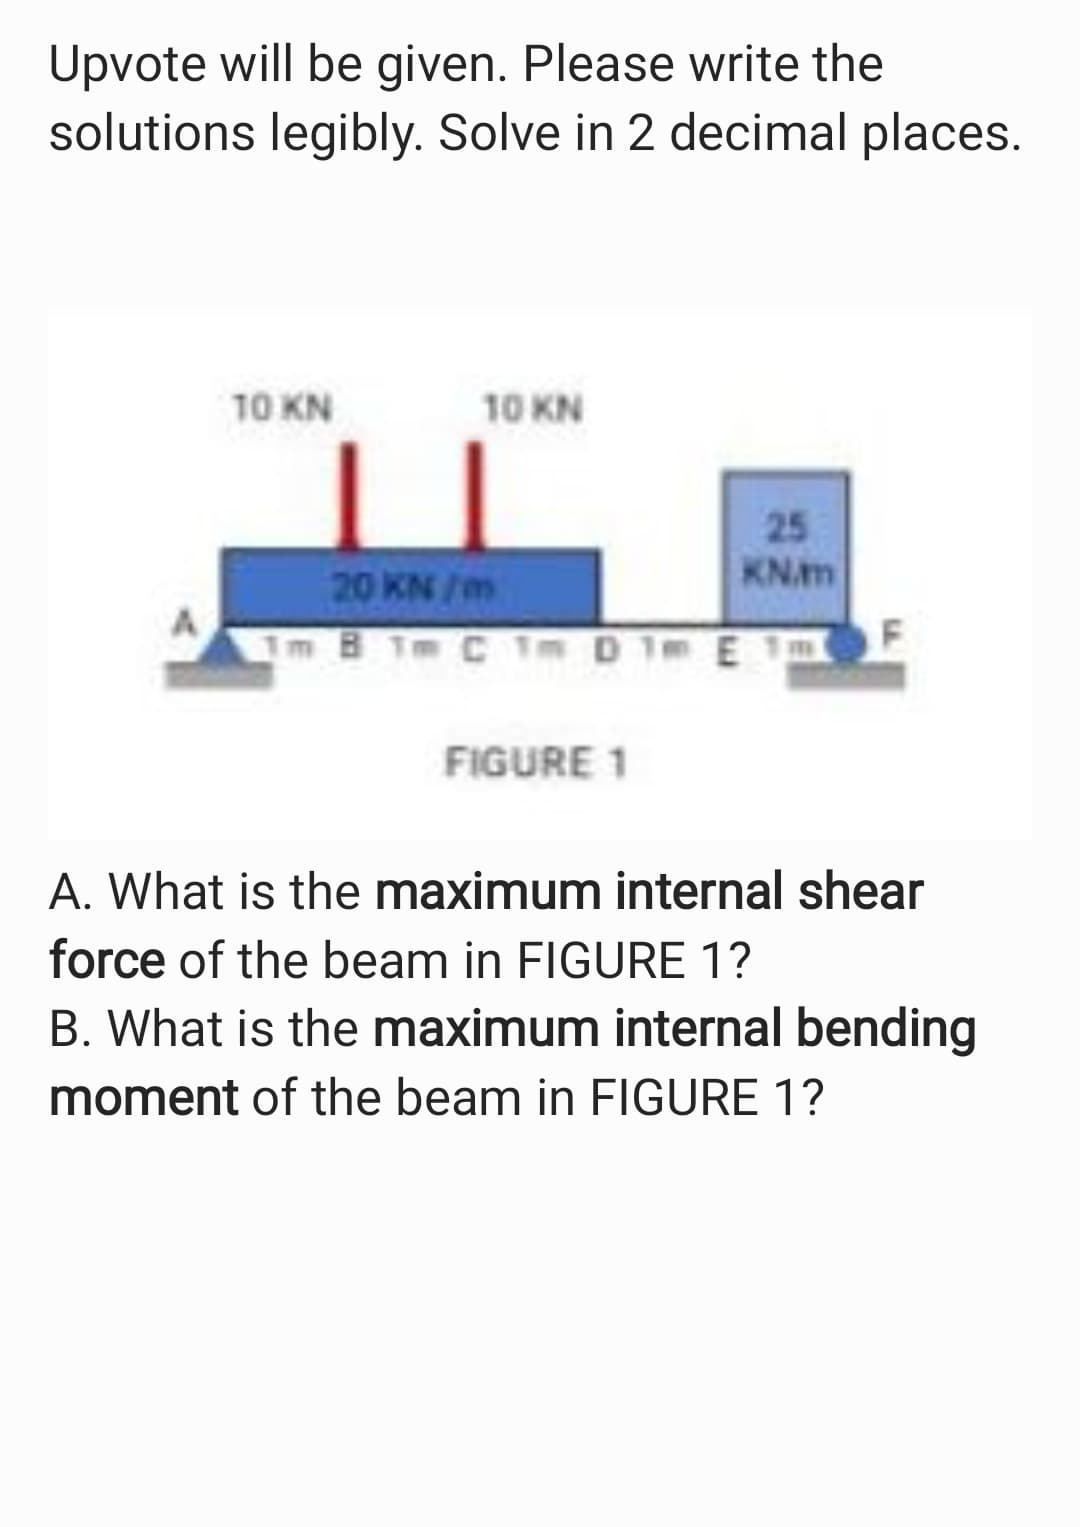 Upvote will be given. Please write the
solutions legibly. Solve in 2 decimal places.
10 KN
10 KN
25
KN/m
20 KN/m
1m
Im B Tm C Tm D 1 E 15
m
FIGURE 1
A. What is the maximum internal shear
force of the beam in FIGURE 1?
B. What is the maximum internal bending
moment of the beam in FIGURE 1?